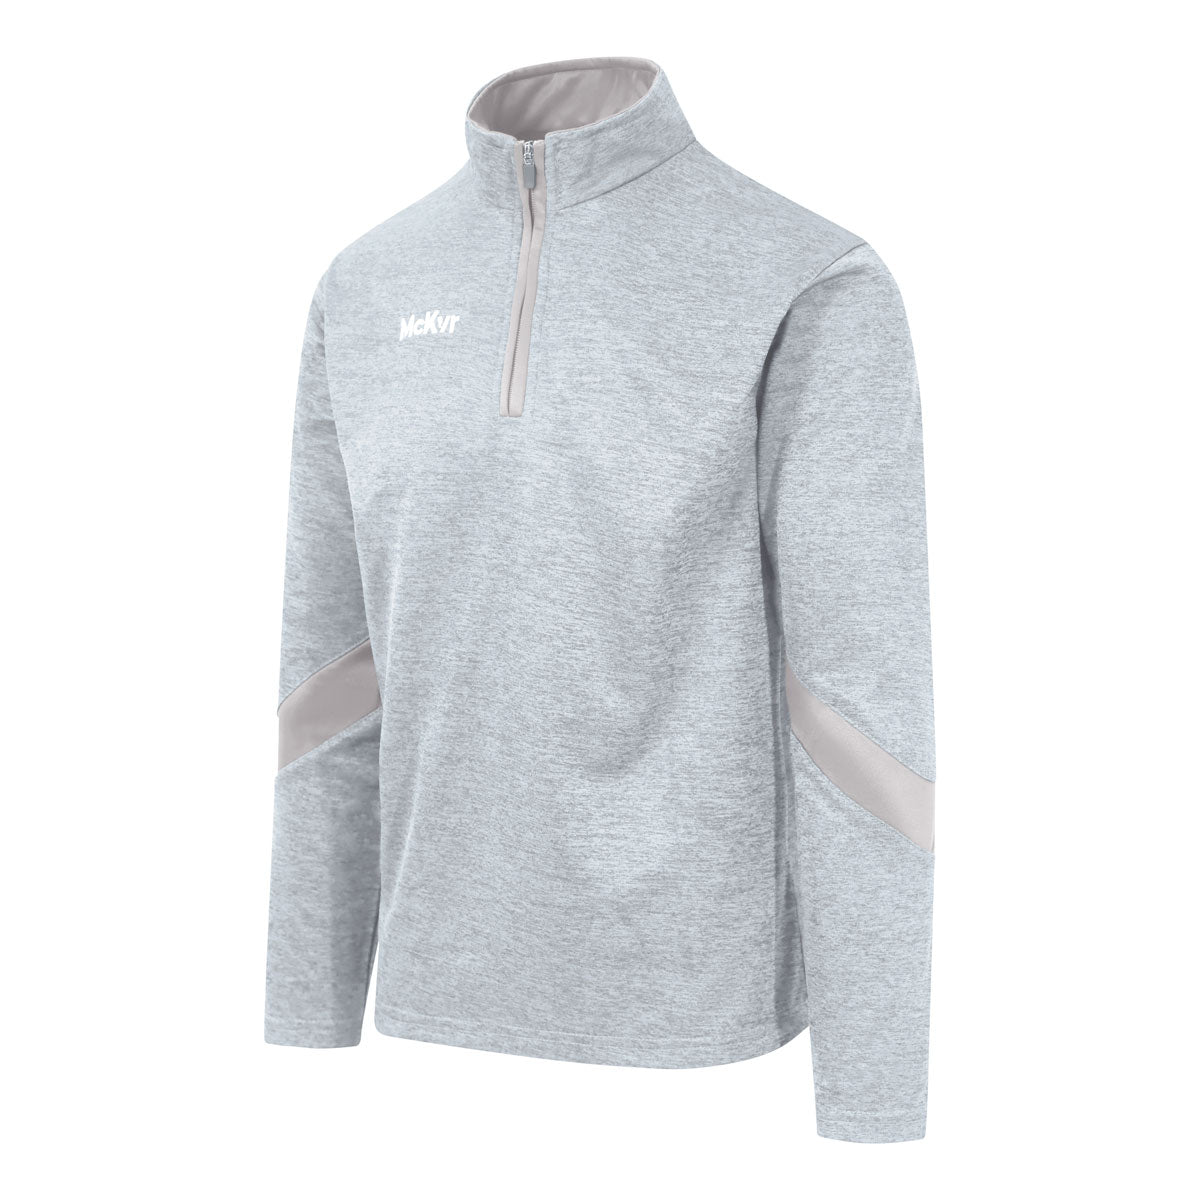 Mc Keever Core 22 1/4 Zip Top - Youth - Grey